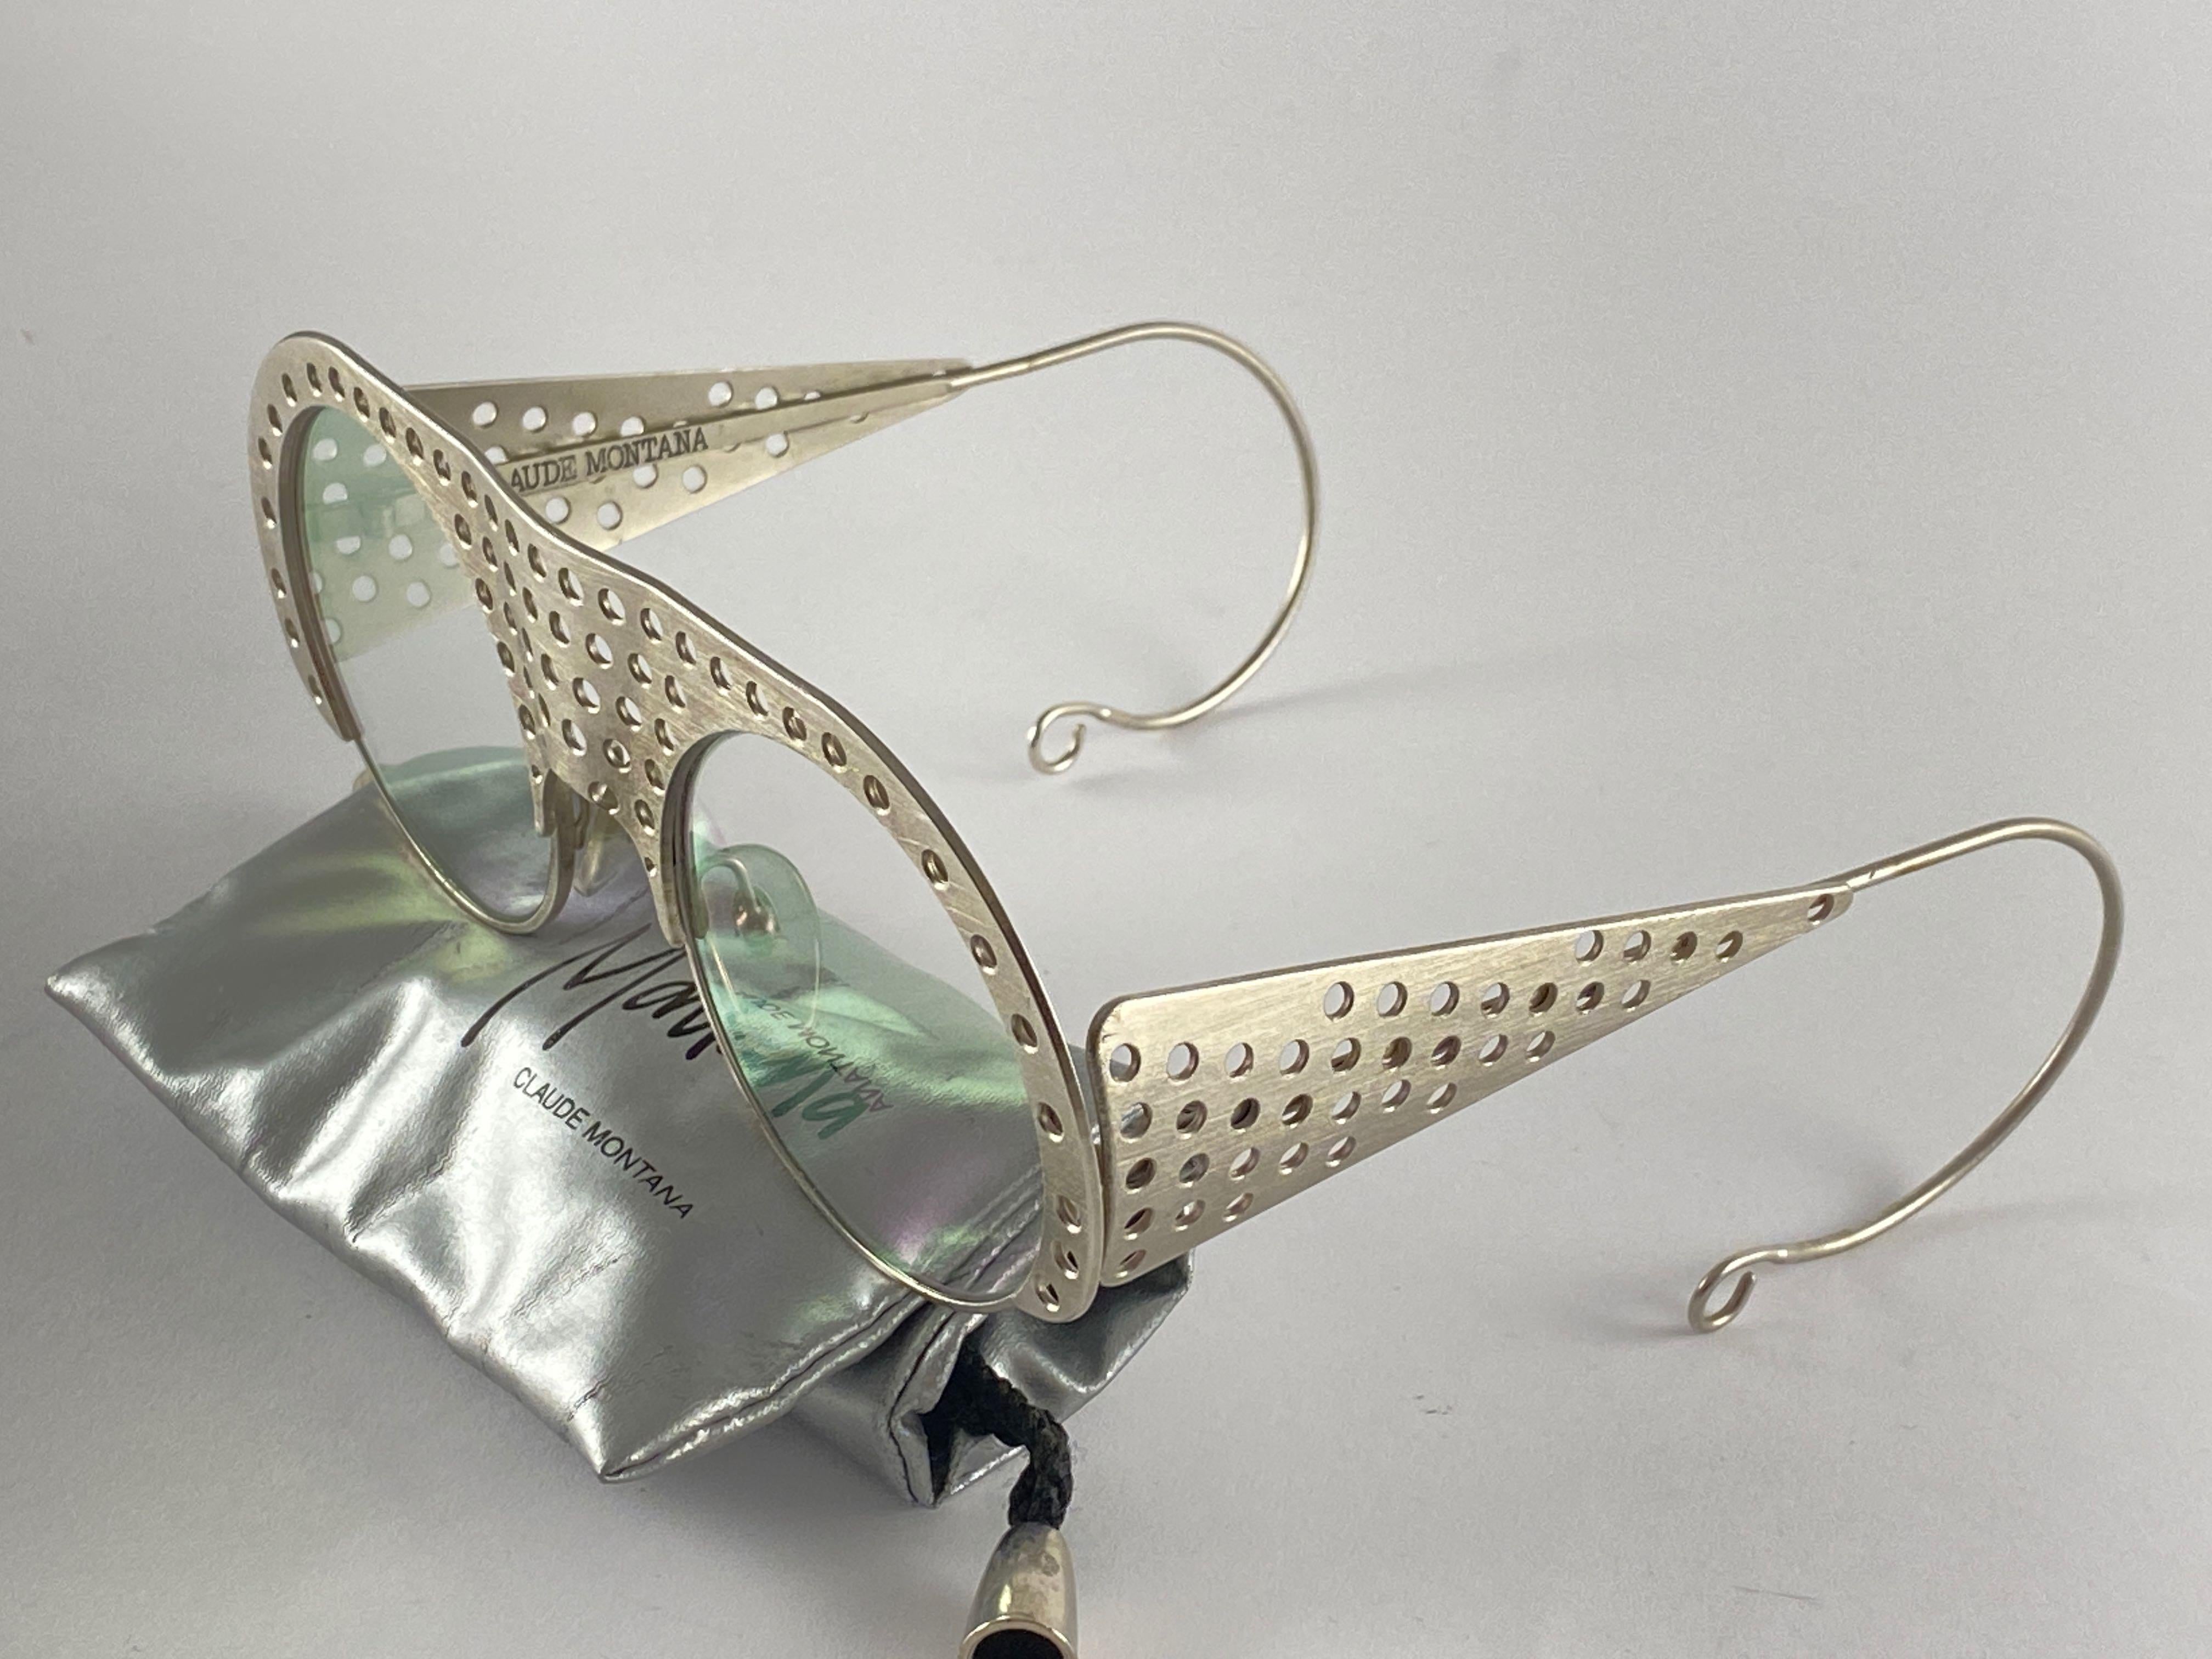 New Vintage Montana Silver Perforated Mask Lady Gaga France Sunglasses 1980's For Sale 2